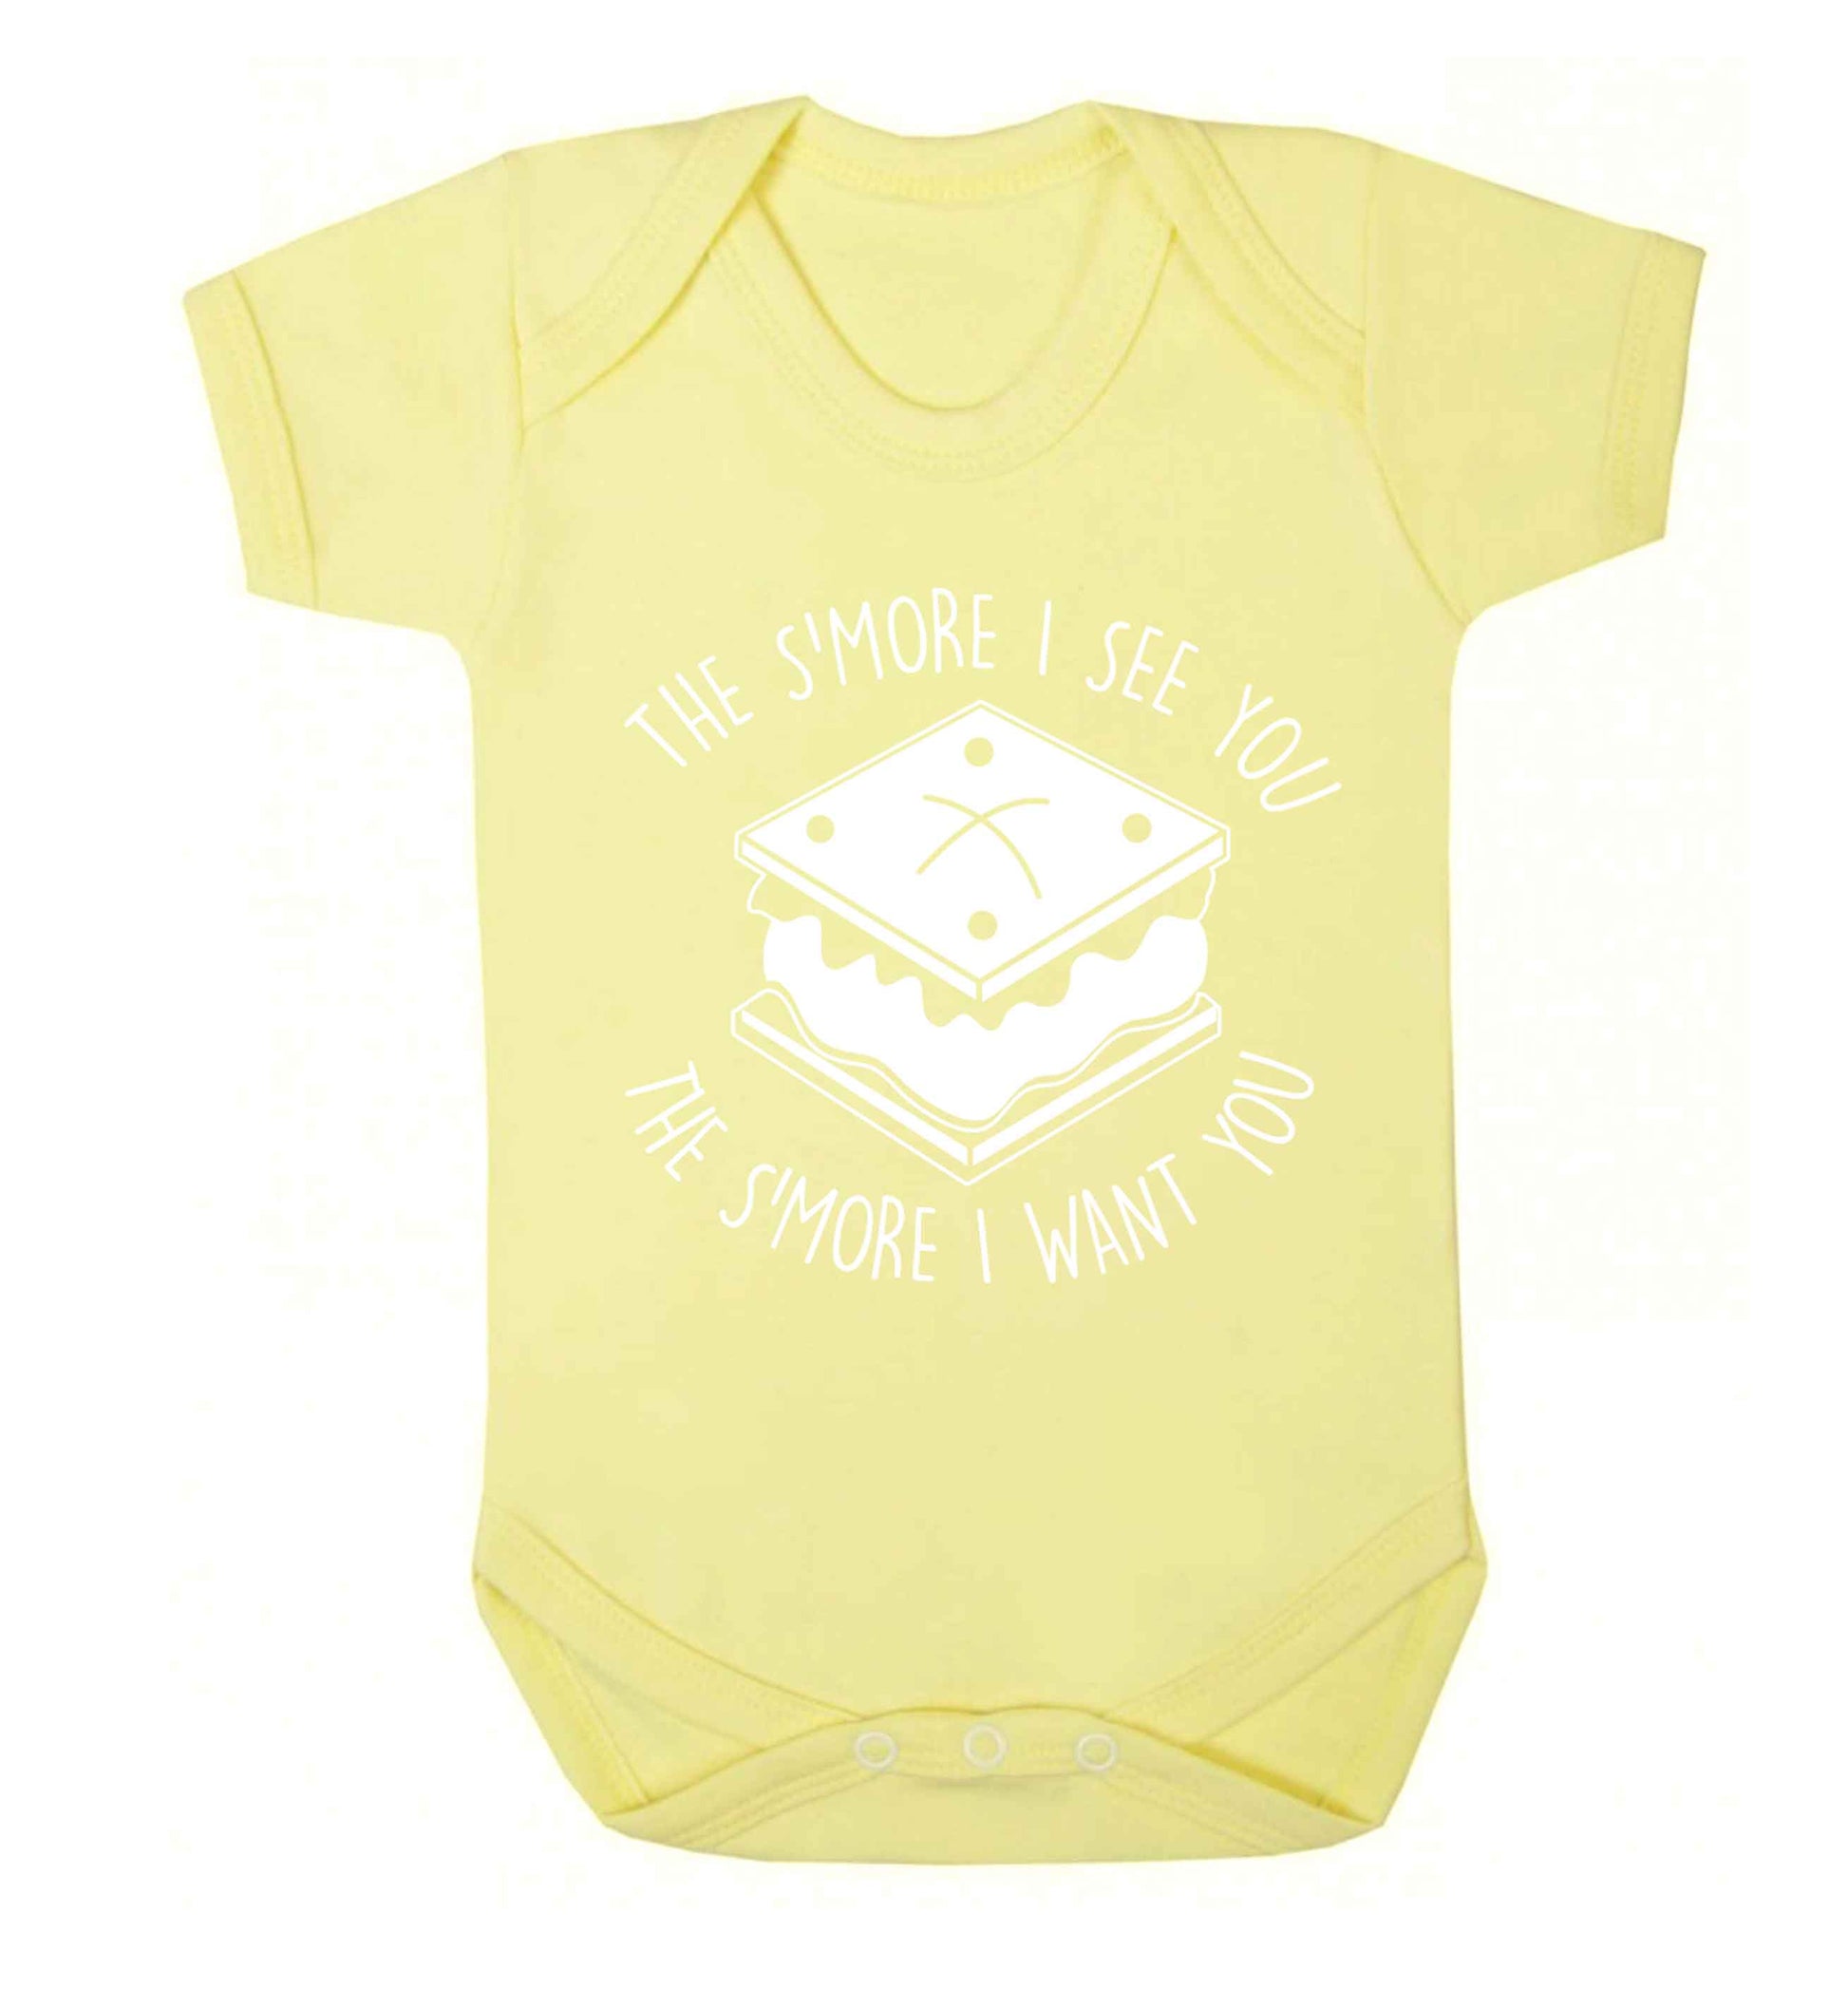 The s'more I see you the s'more I want you Baby Vest pale yellow 18-24 months